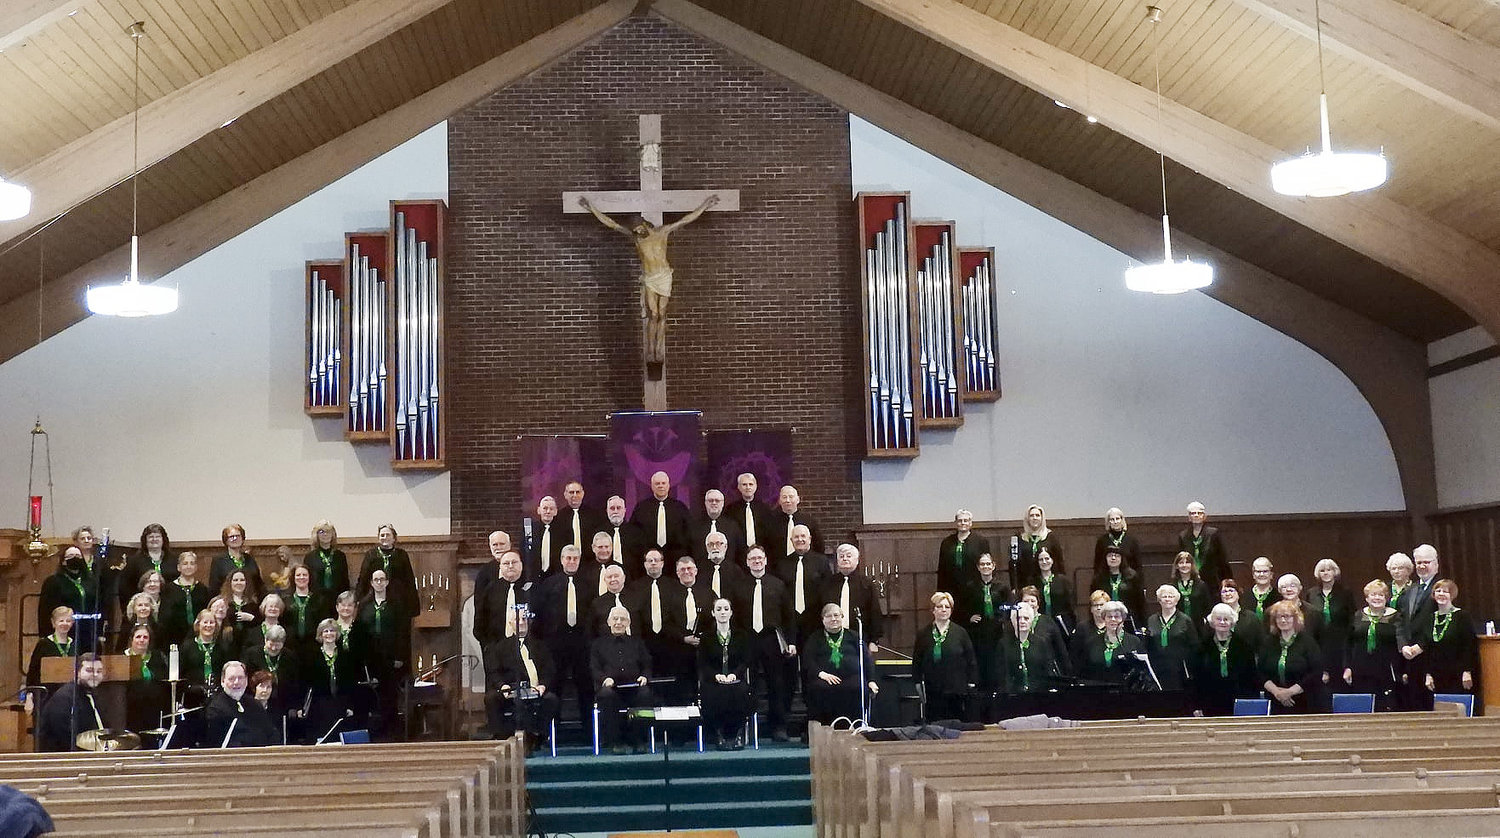 The Oneida Area Civic Chorale will present “An American Christmas” on Sunday, Dec. 4 at 4